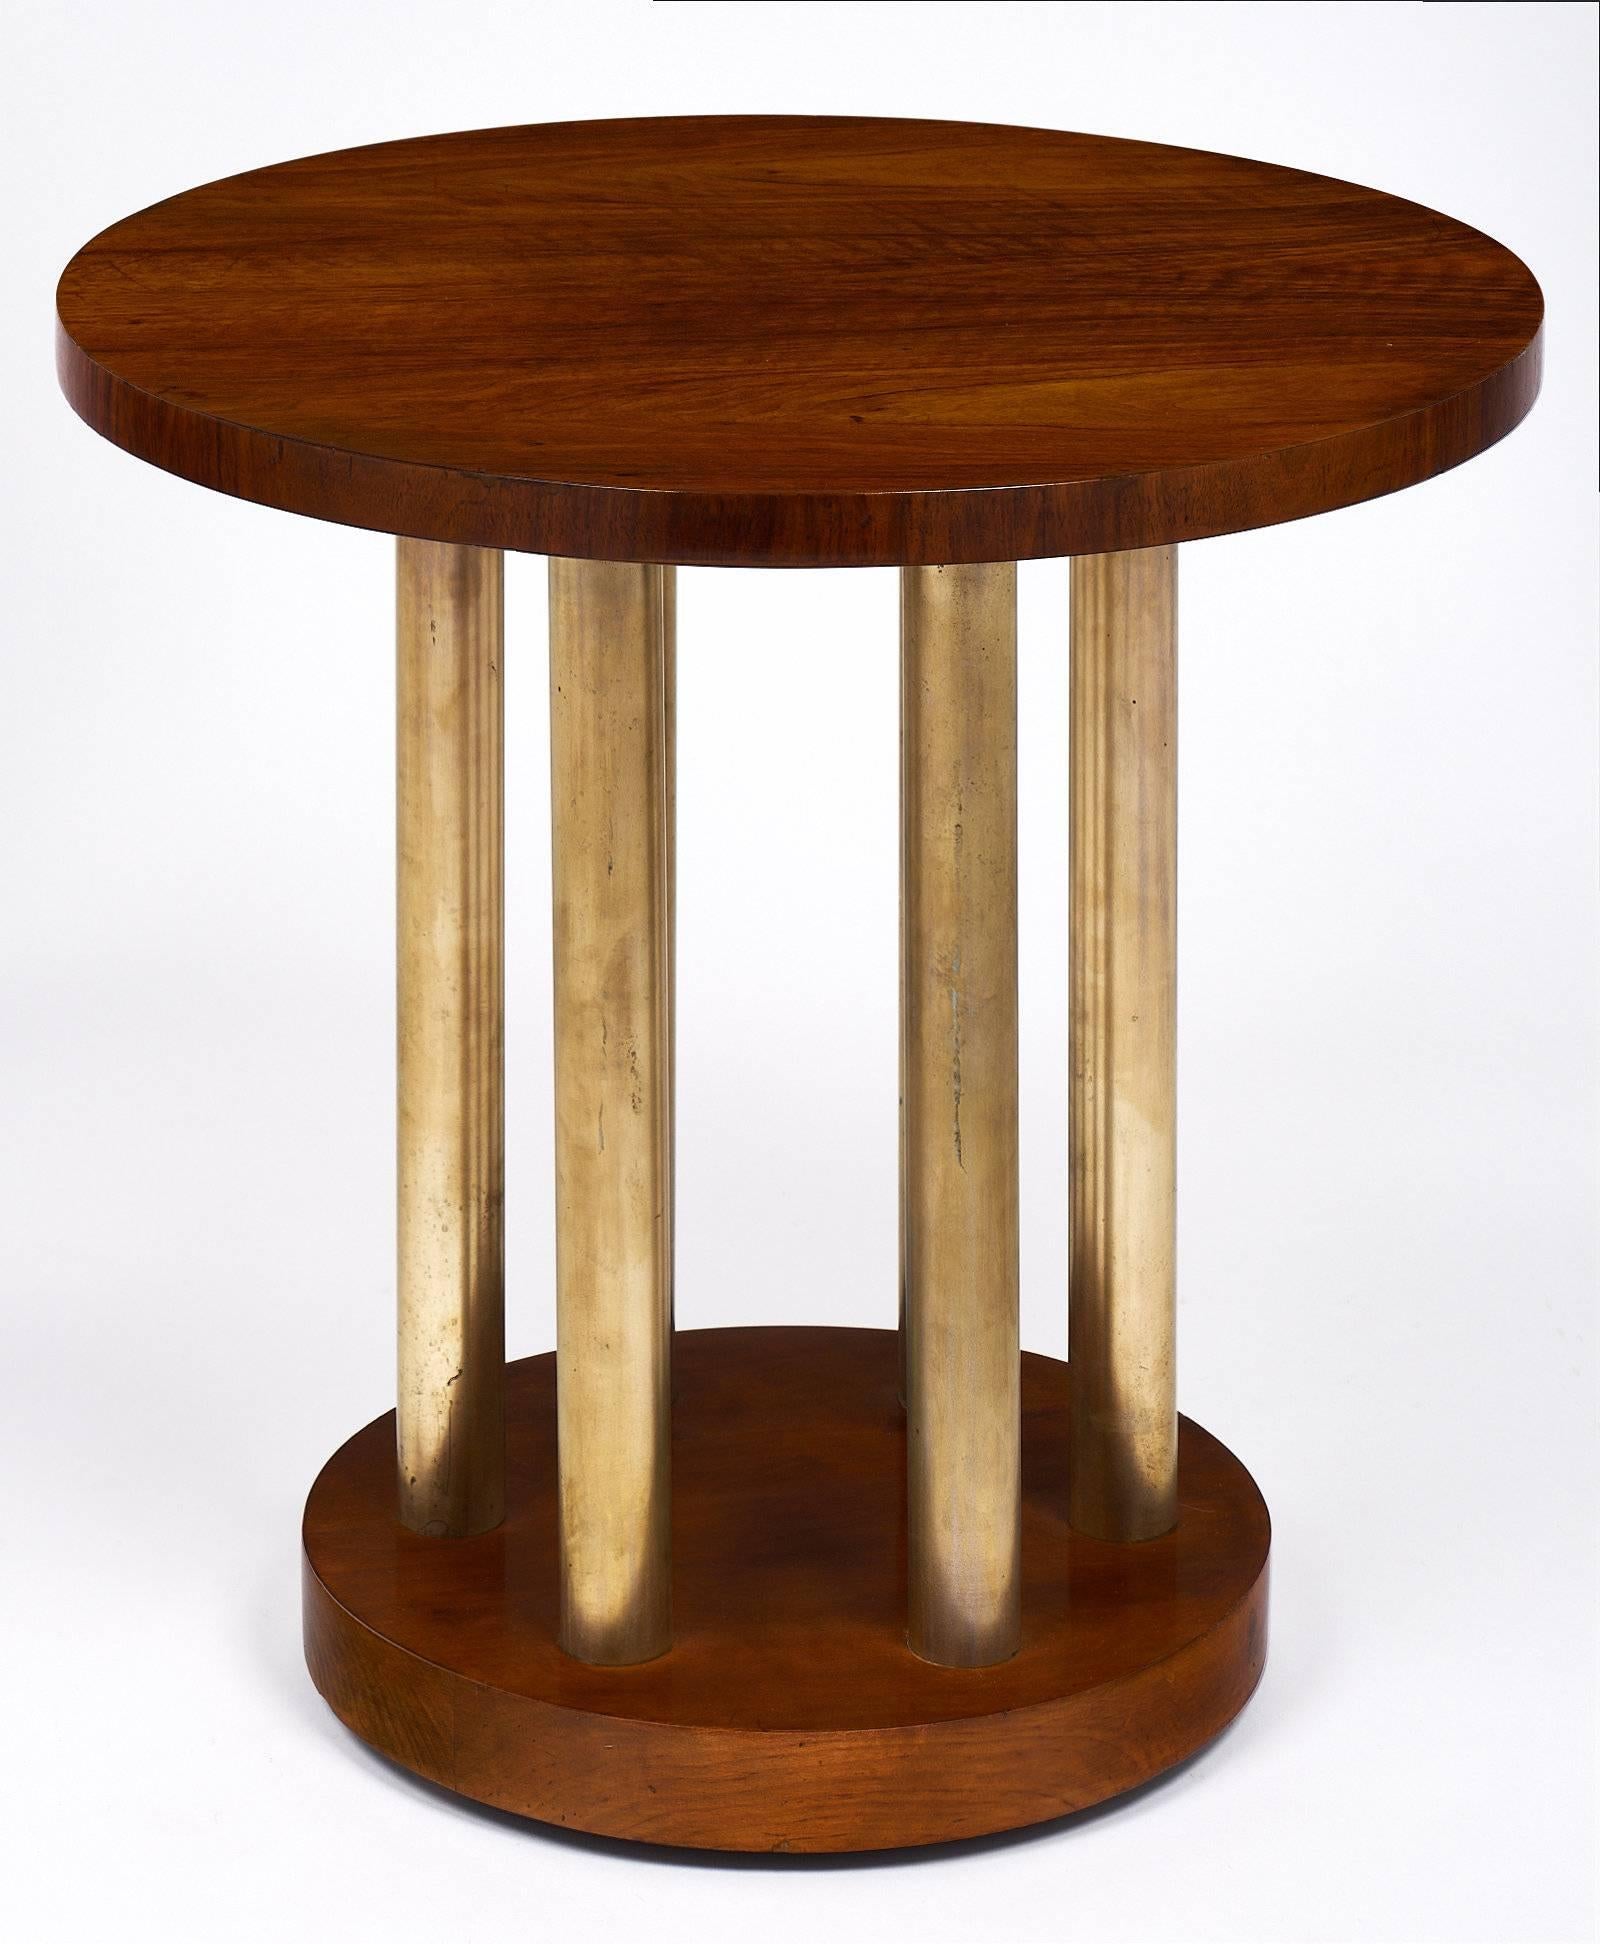 A bold and elegant gueridon with a solid walnut base and top. The piece boasts six tubular brass legs with a striking patina. We loved the strong feel of the piece and the contrast between the beautiful French polish glow on the walnut and the light